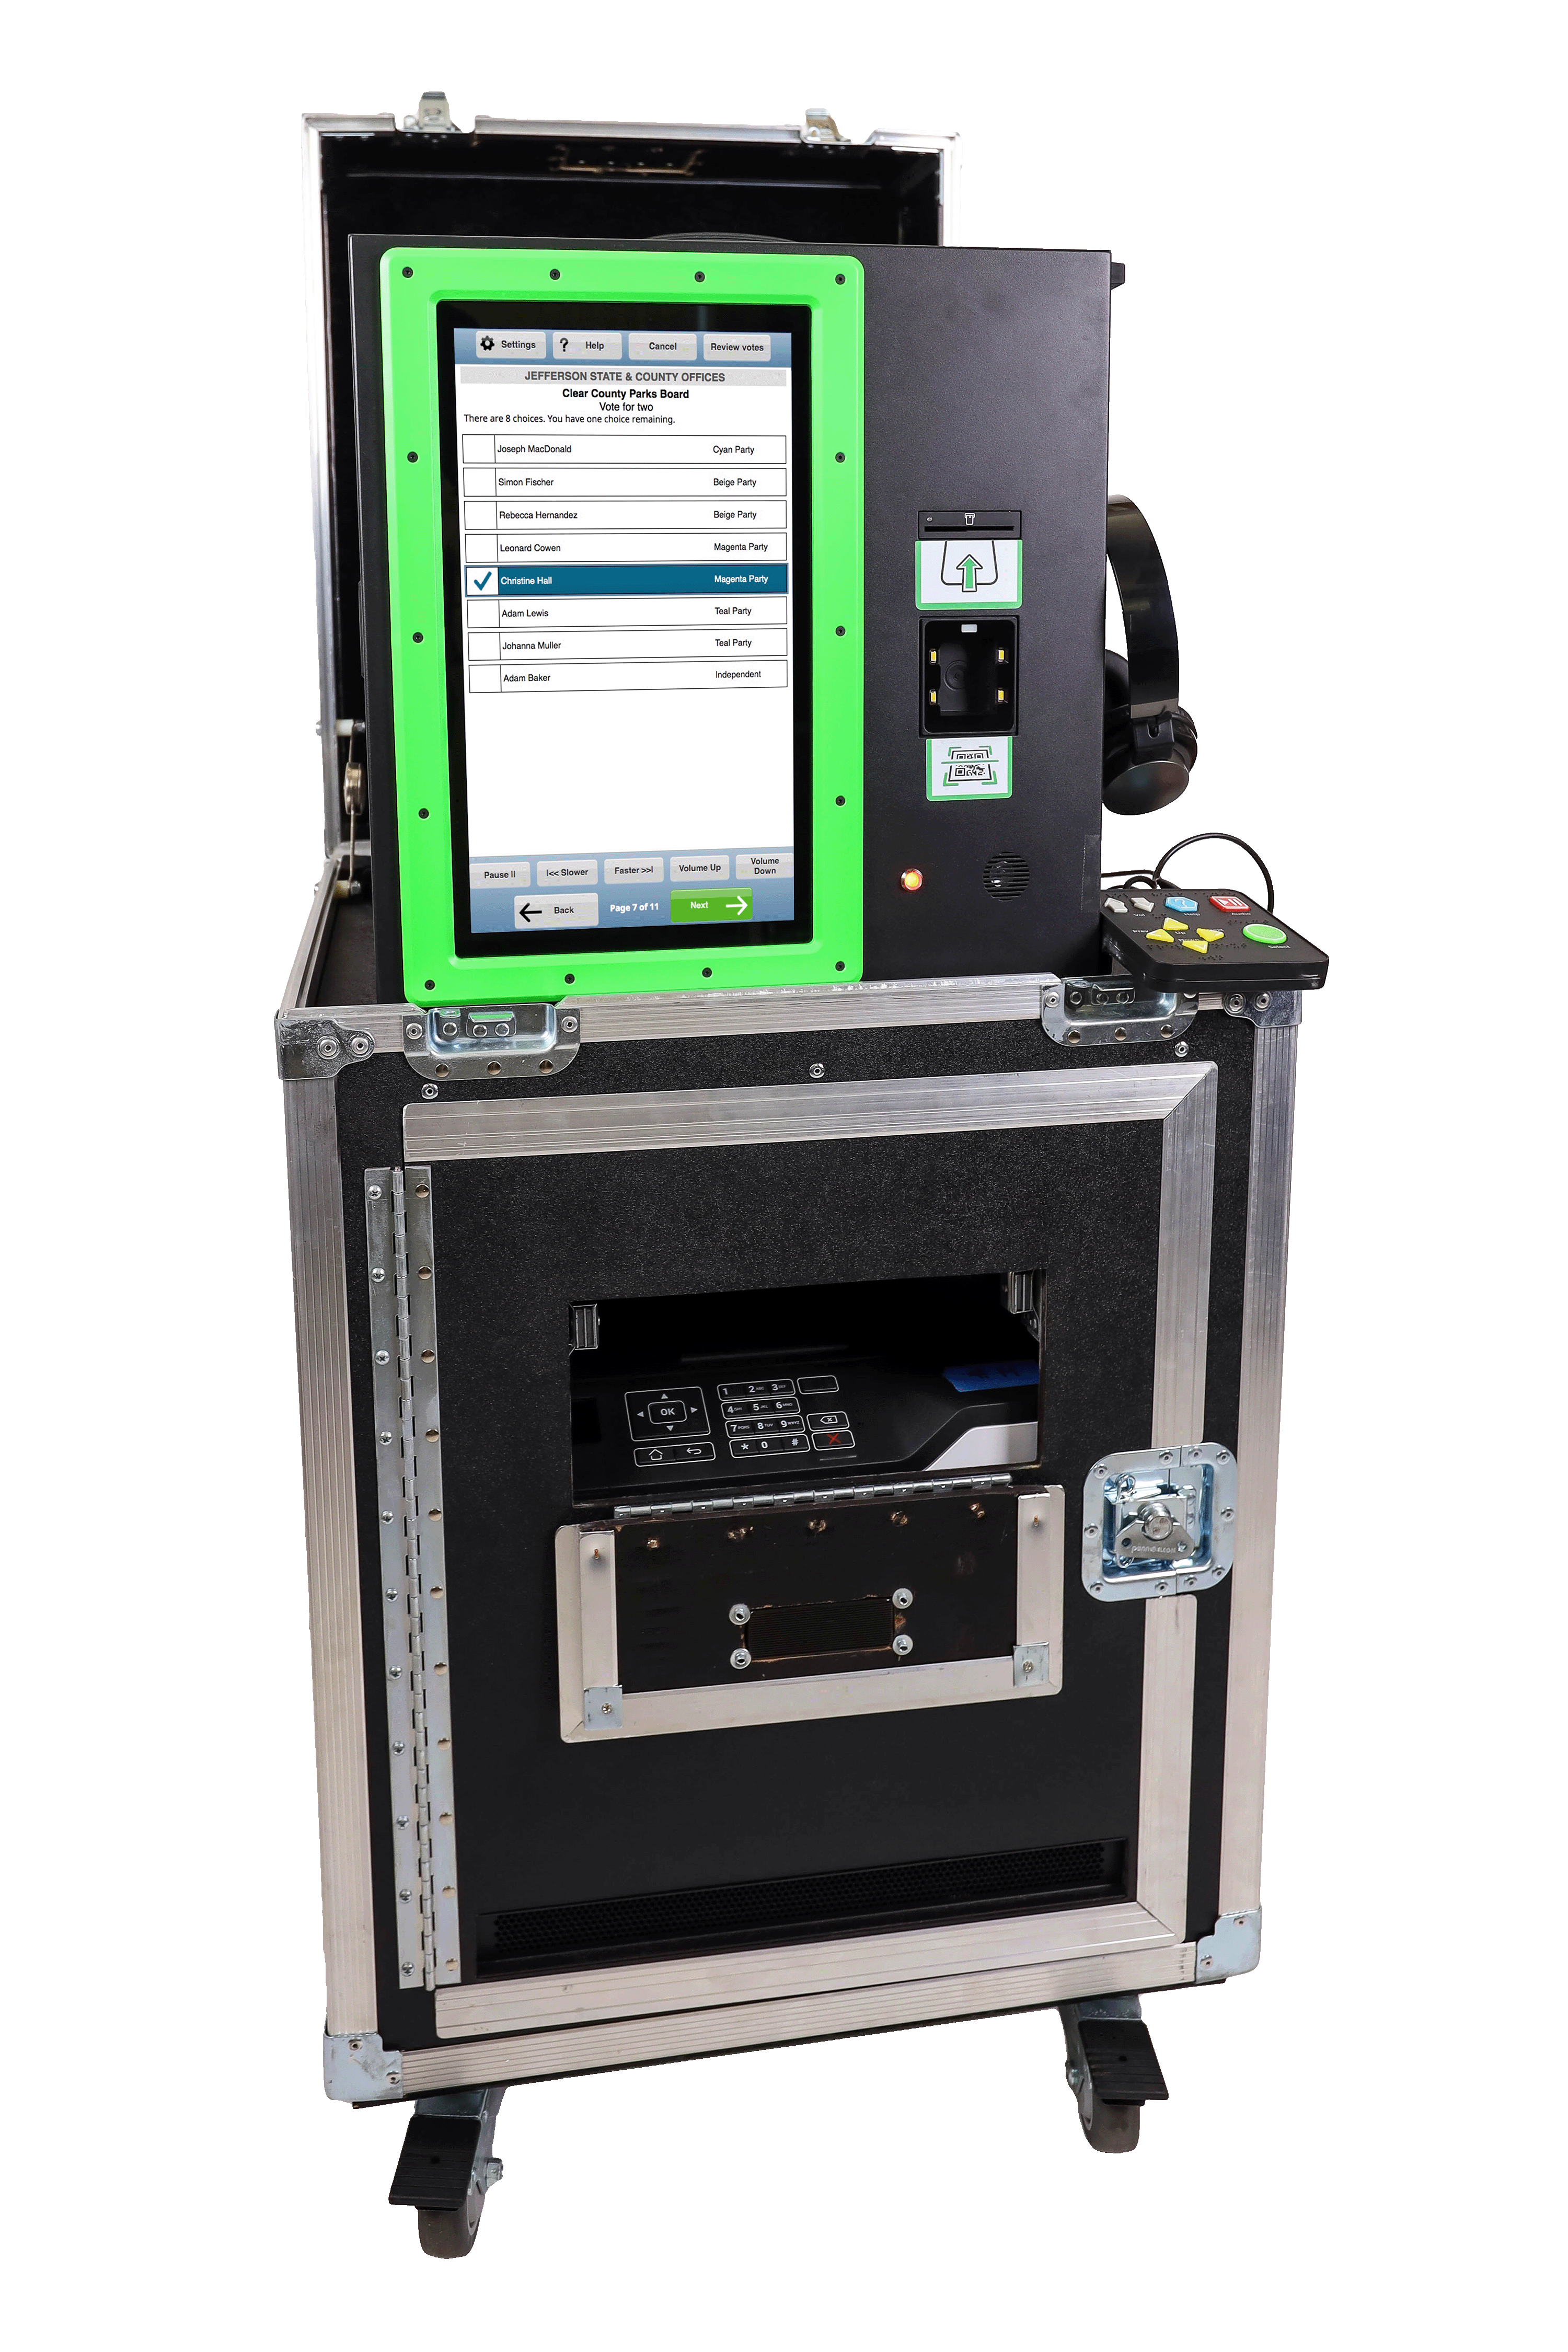 Touchscreen voting machine with neon green frame is positioned on black and silver base. Base has a locked door and wheels. To the right of touchscreen is a tactile controller and headphones.